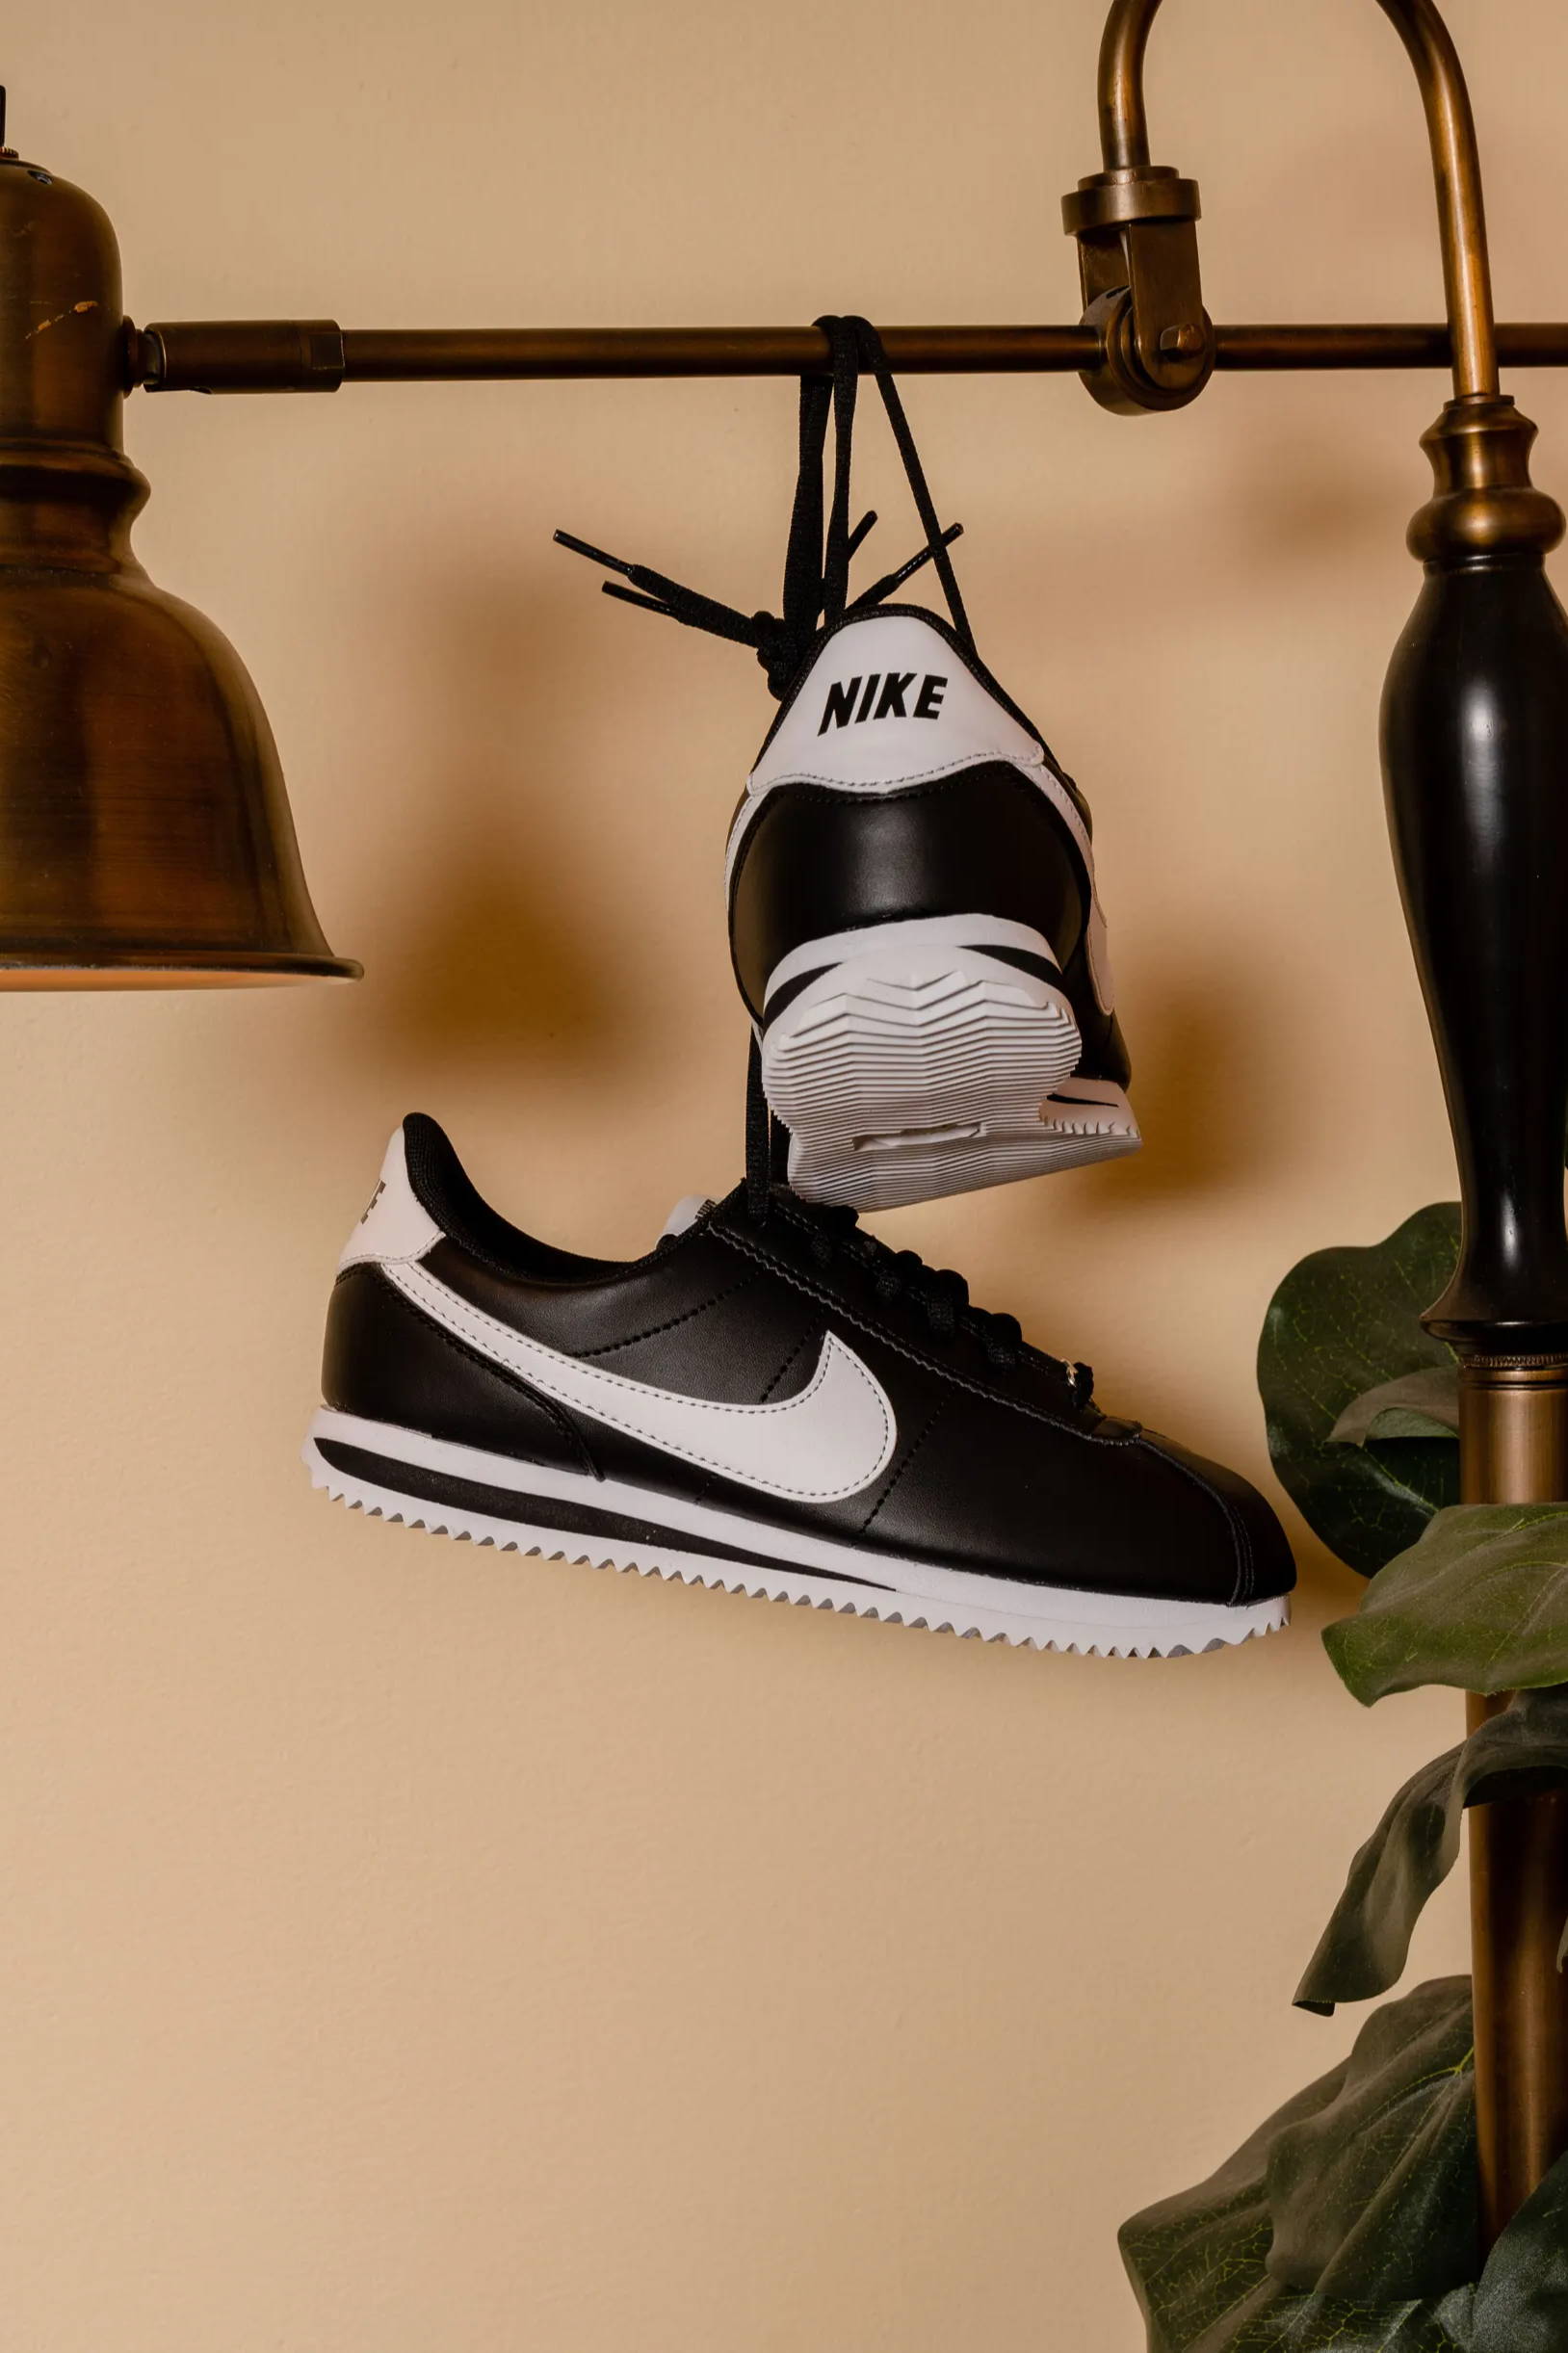 prevent In need of hotel The History of the Nike Cortez | Shoe Palace Blog